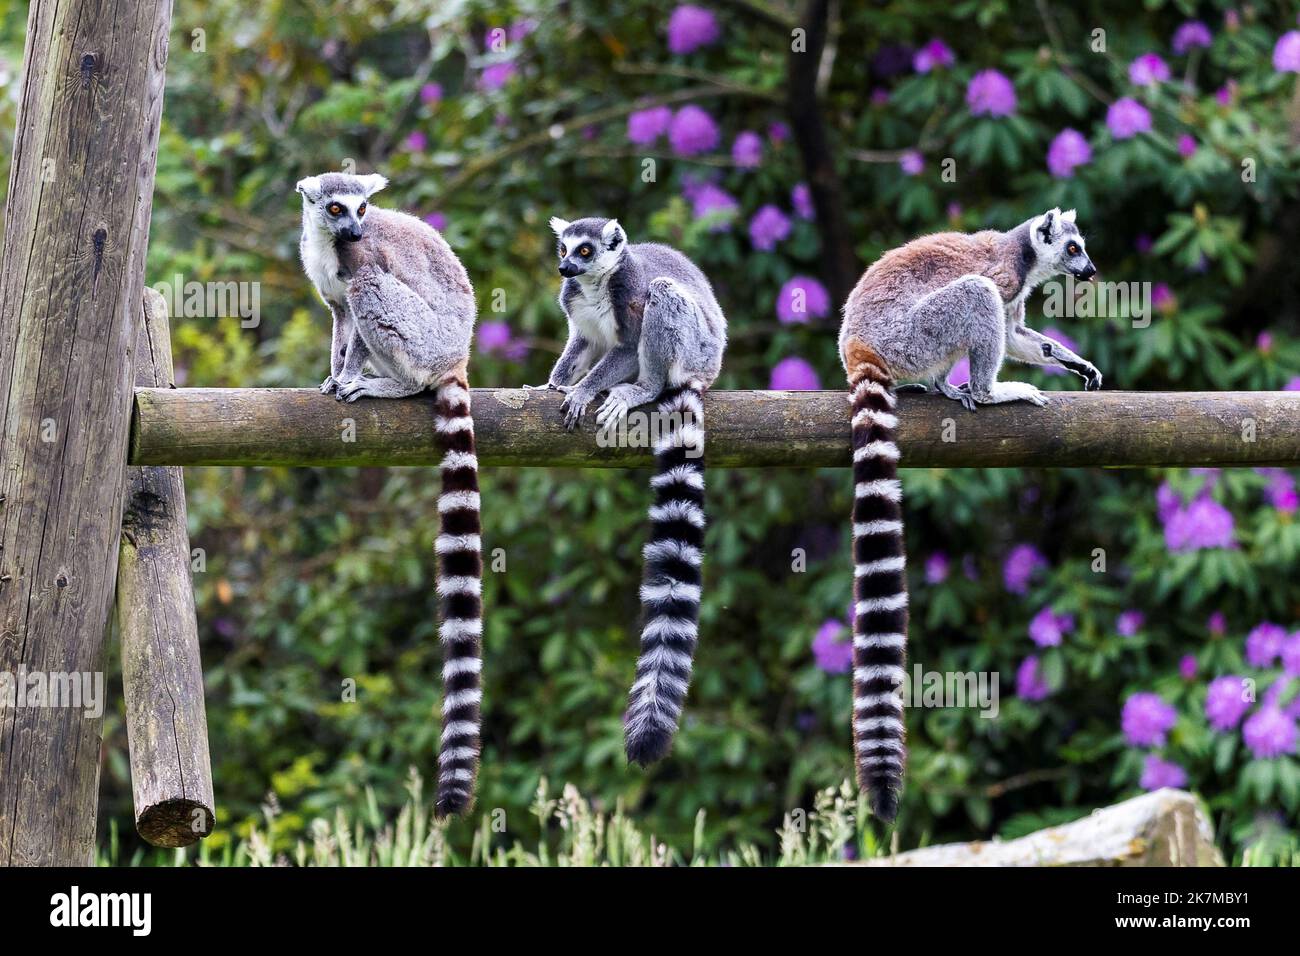 A portrait of 3 ring tailed lemurs sitting on a wooden beam in a zoo. the animals are looking around. the mammals are very cute and their long striped Stock Photo